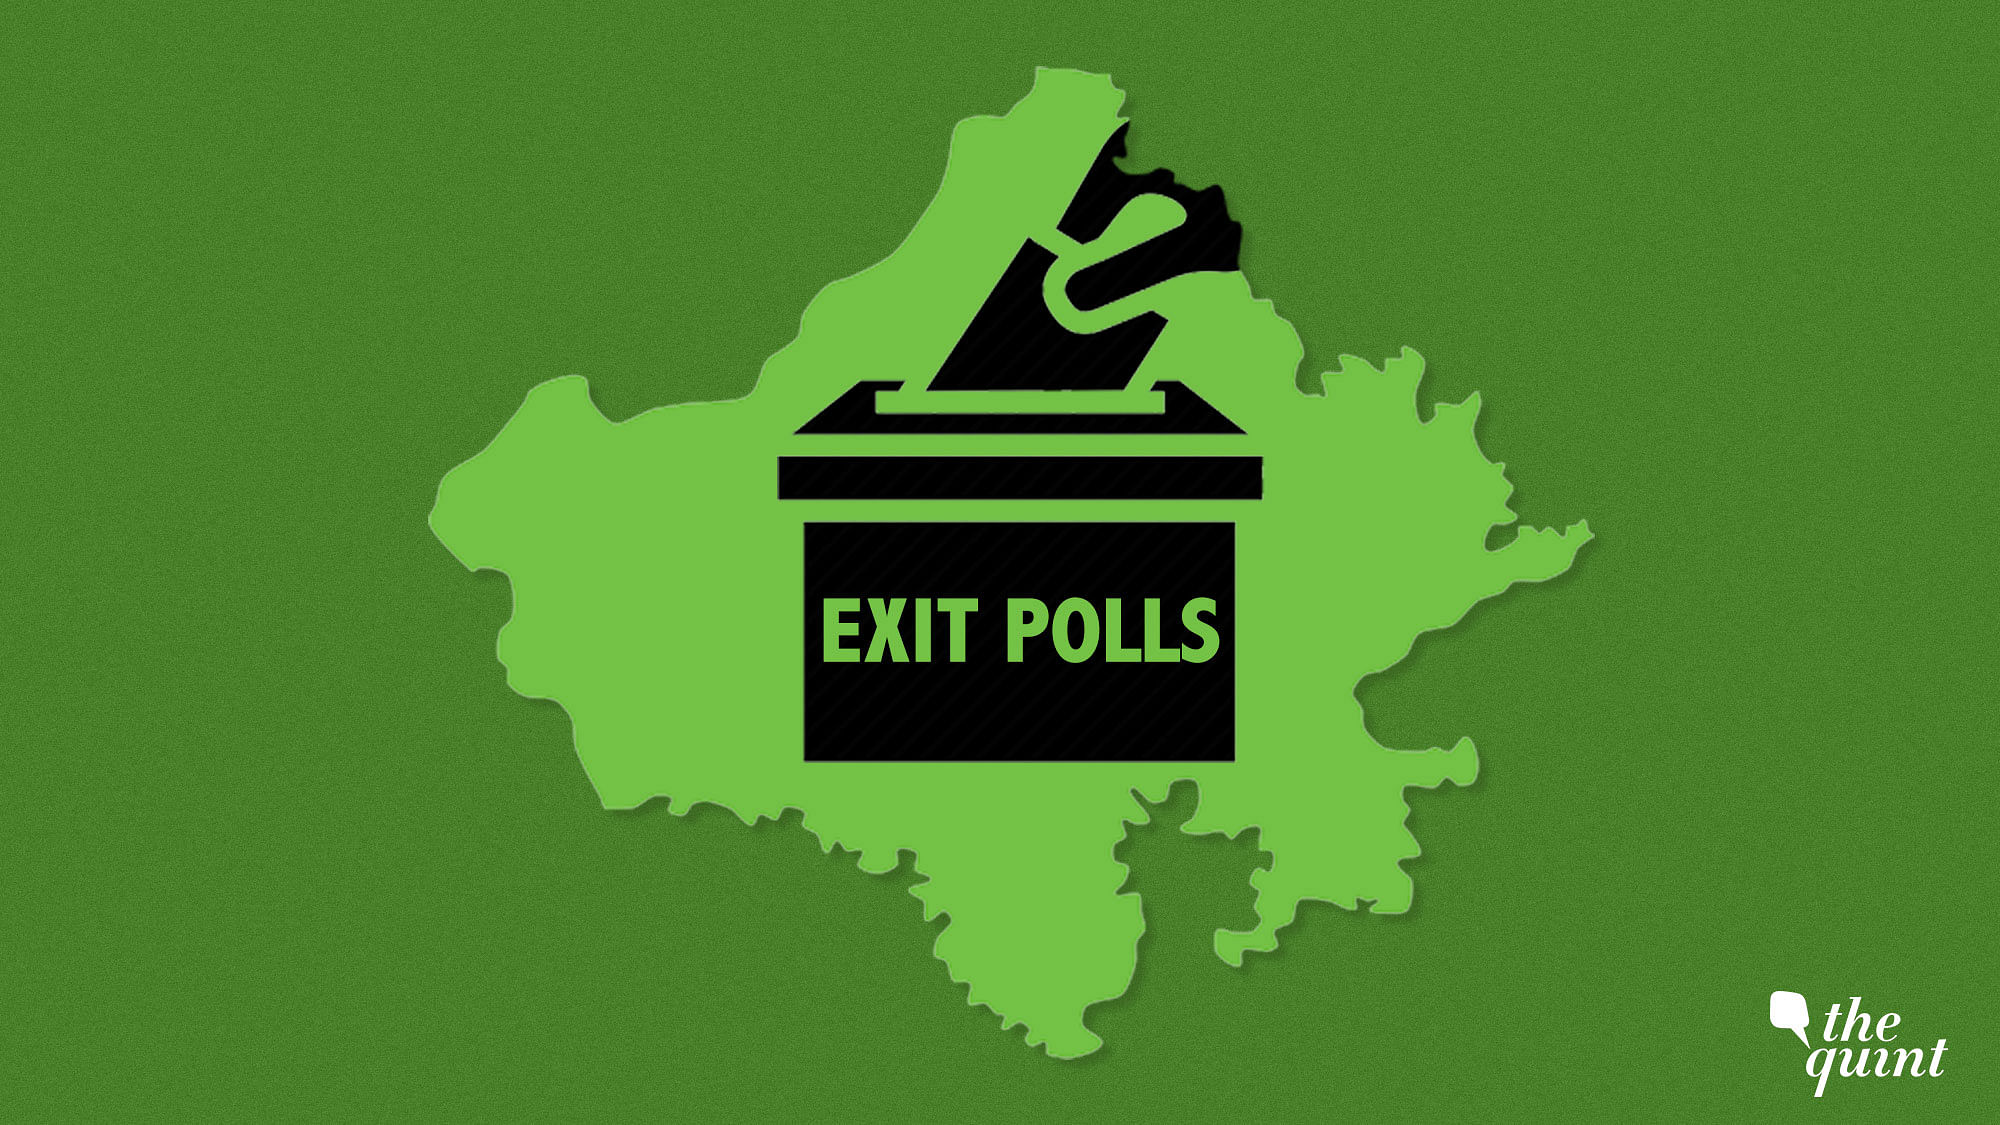 Stay tuned with The Quint at 6 pm on 7 December, as we break down the post-poll numbers for you.